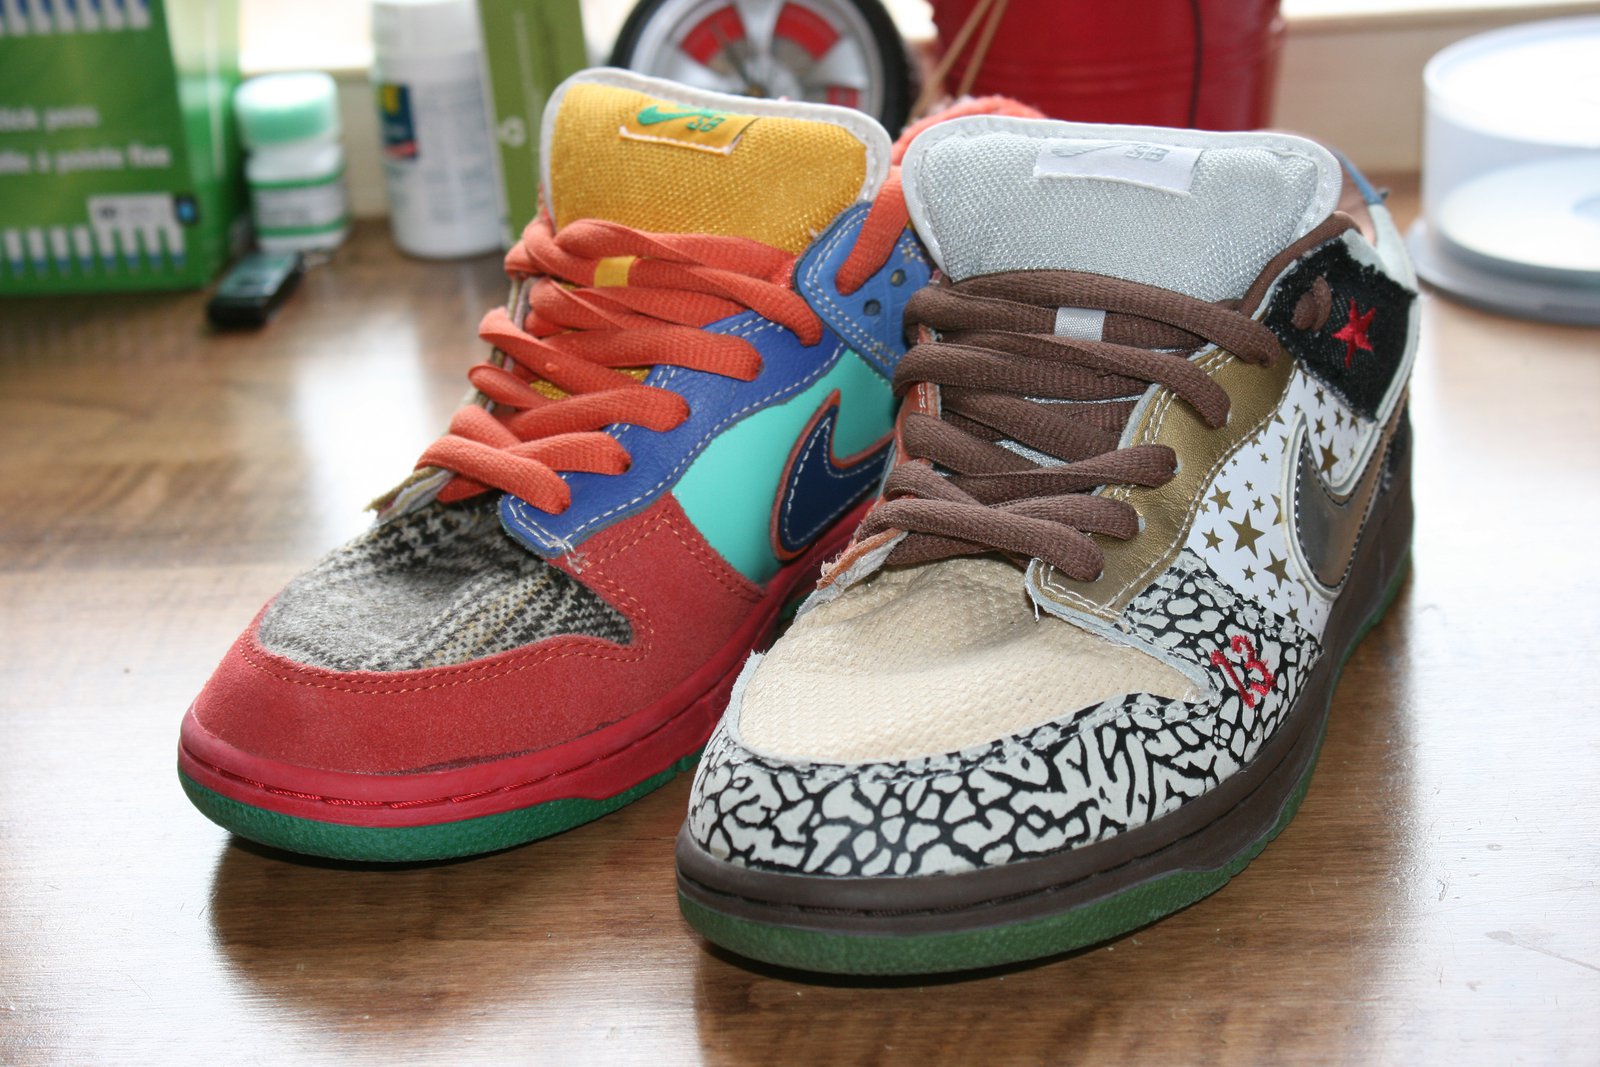 What the dunks